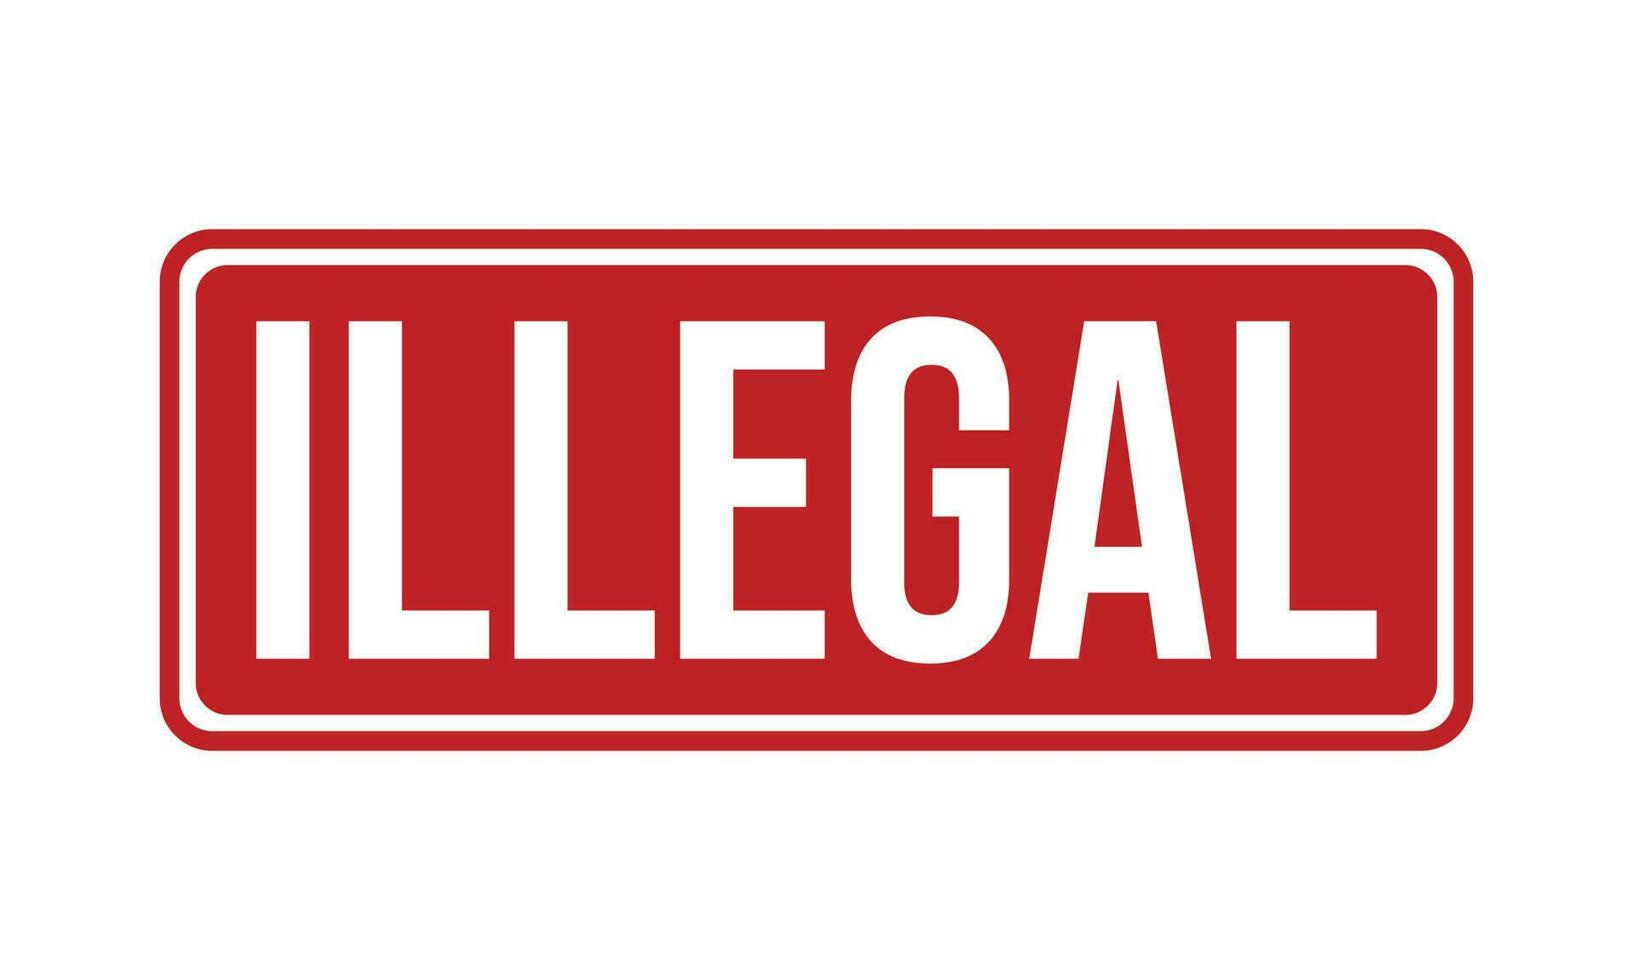 Illegal Rubber Stamp Seal Vector